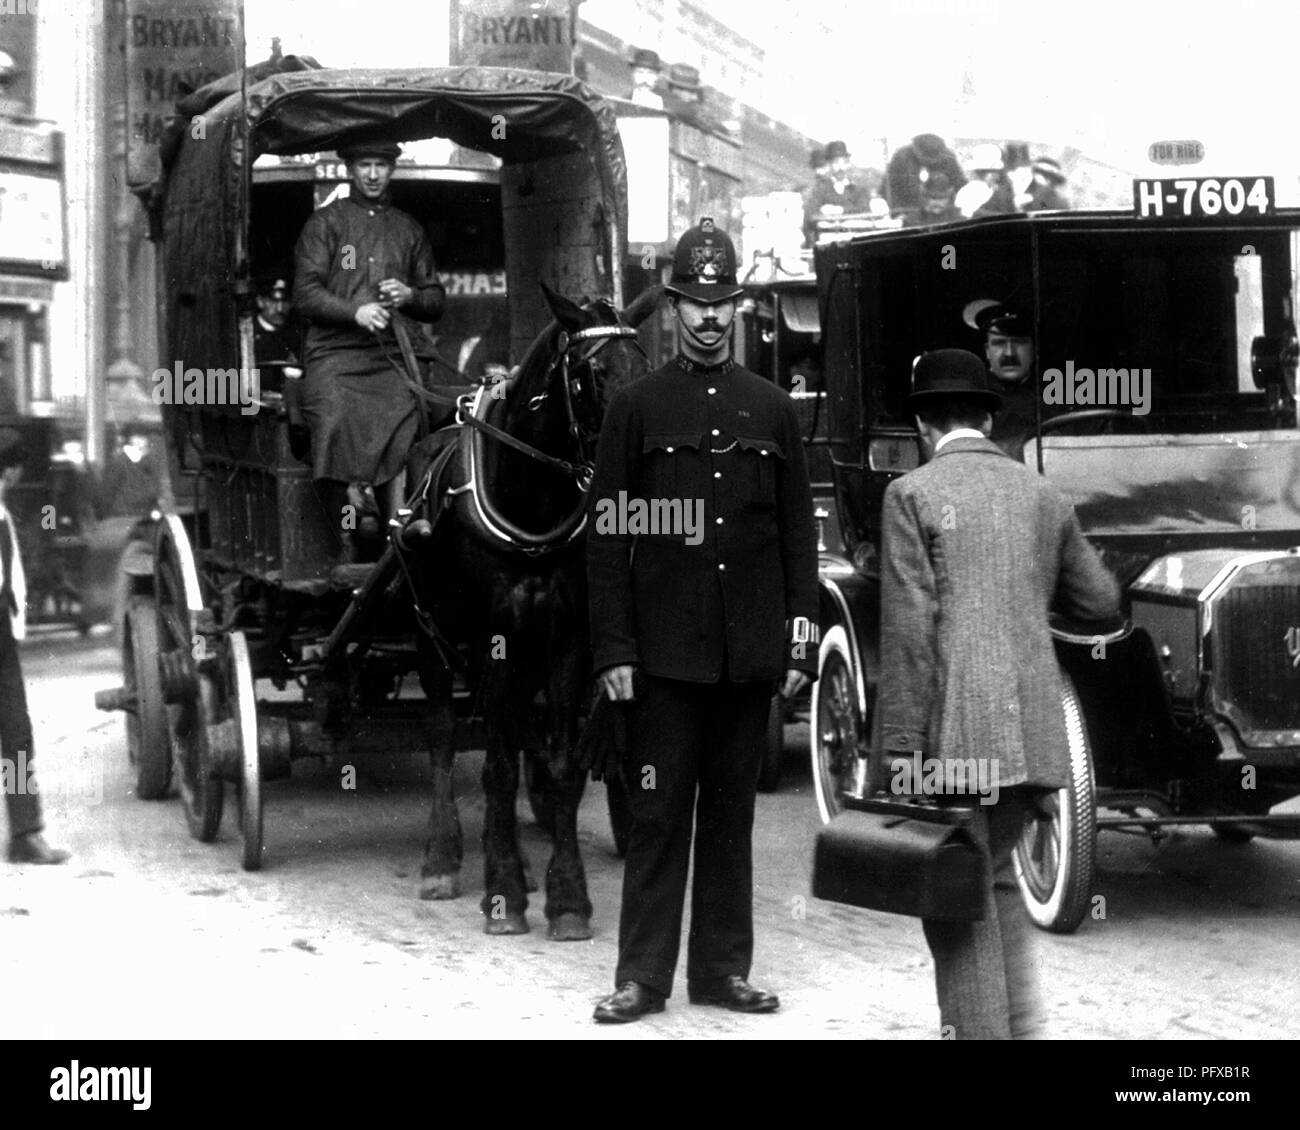 Vintage London Taxi High Resolution Stock Photography and Images - Alamy